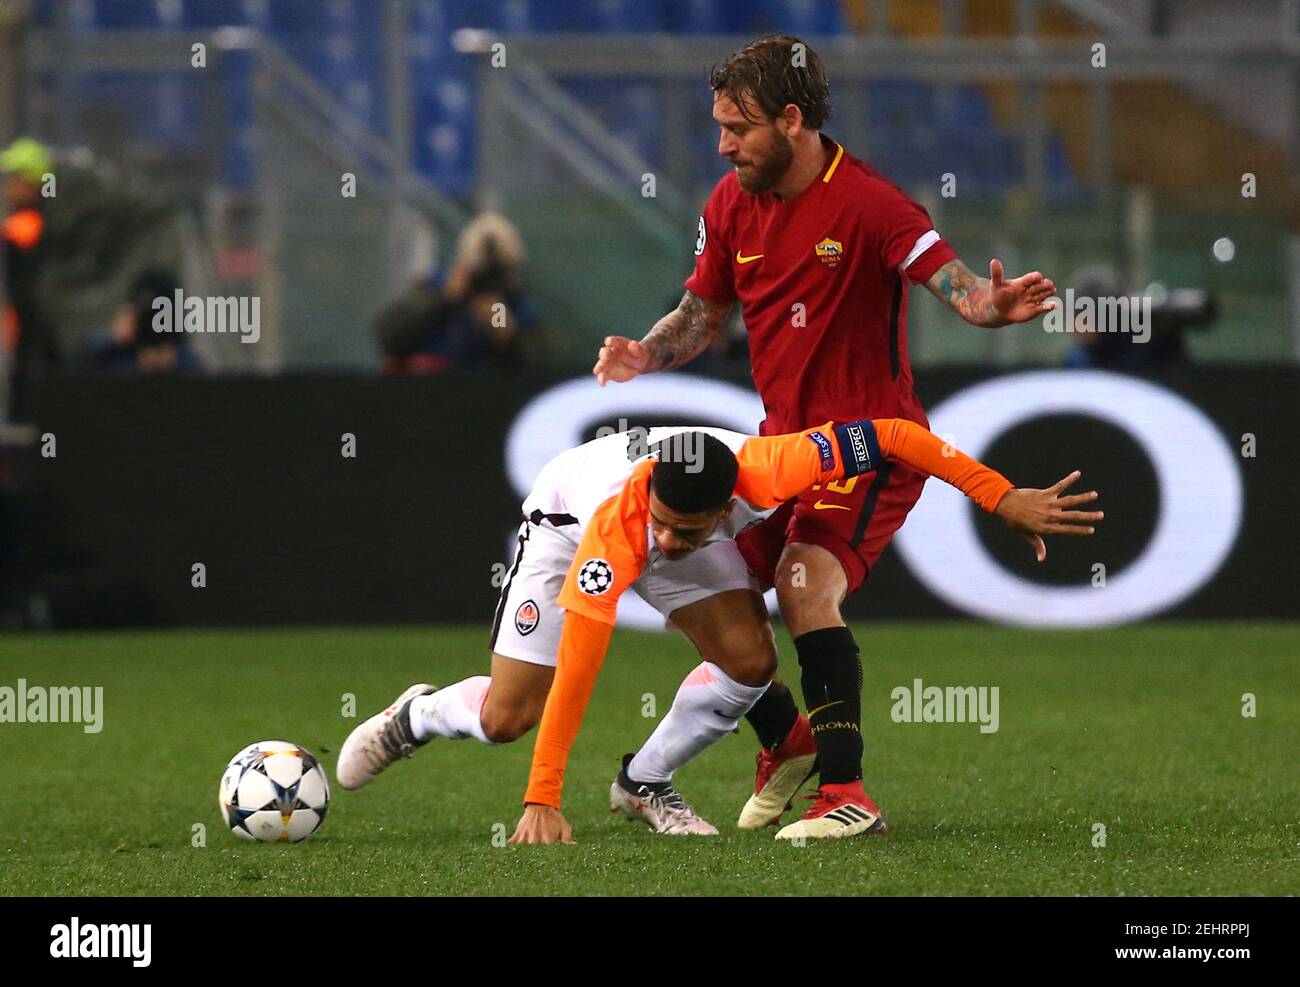 Soccer Football - Champions League Round of 16 Second Leg - AS Roma vs Shakhtar Donetsk - Stadio Olimpico, Rome, Italy - March 13, 2018   Shakhtar Donetsk's Taison in action with Roma's Daniele De Rossi   REUTERS/Alessandro Bianchi Stock Photo